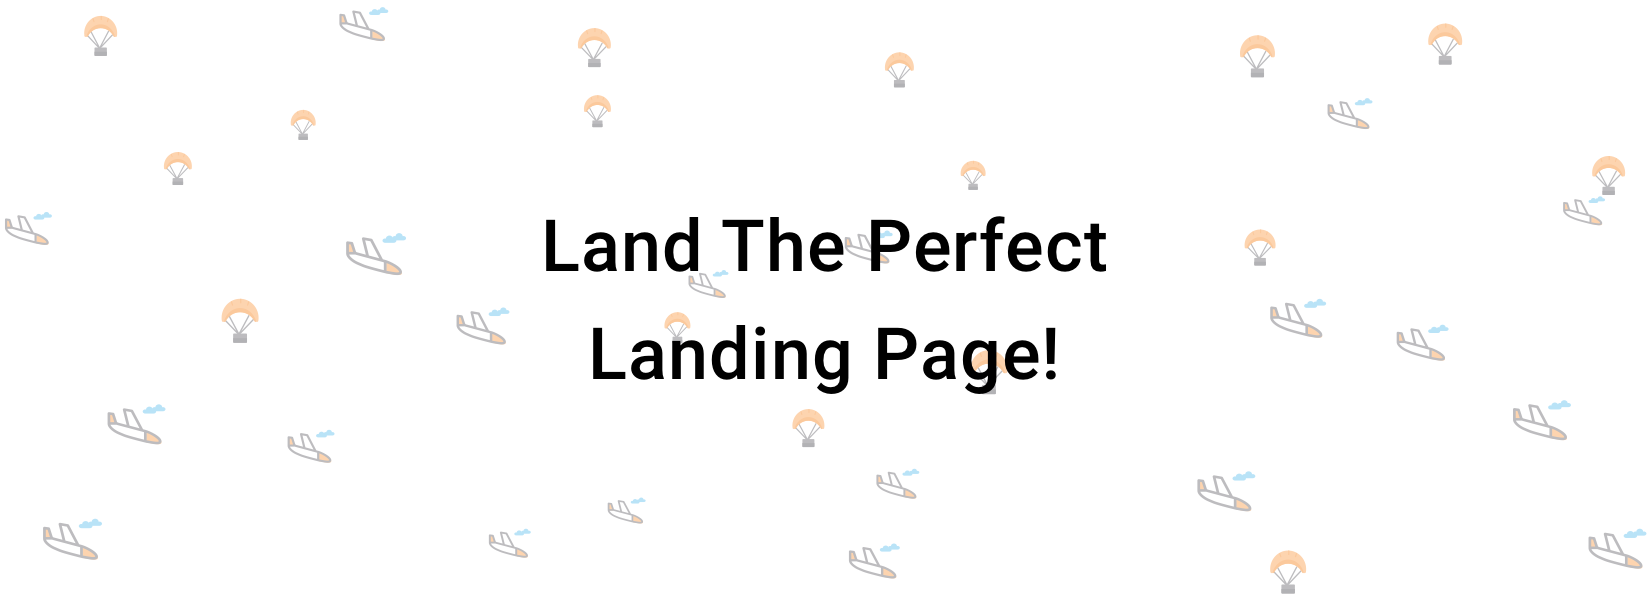 Land the perfect landing page.